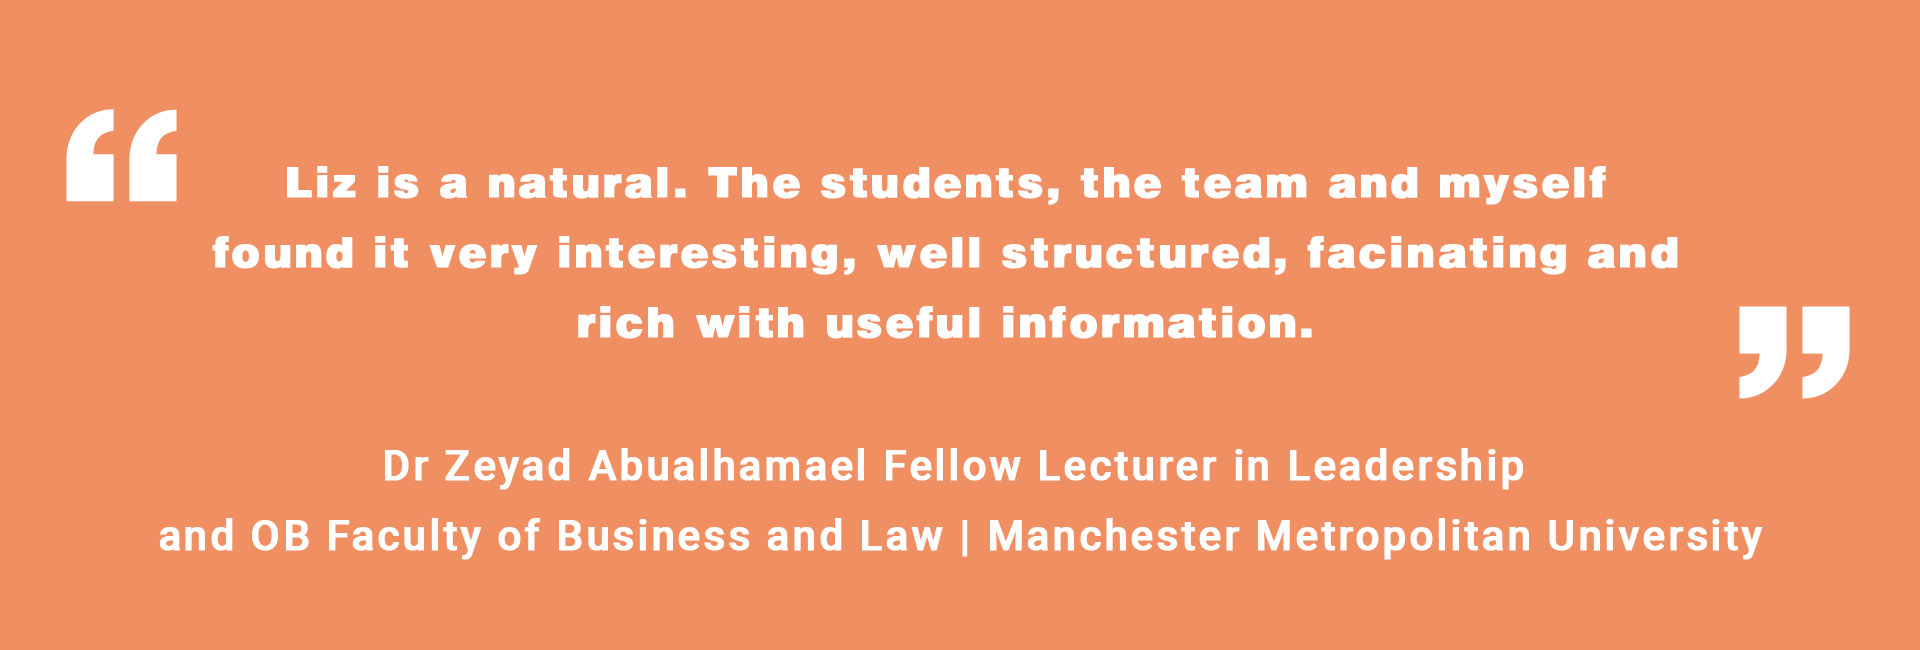 Quote Dr Zeyad Abualhamael Fellow Lecturer in Leadership